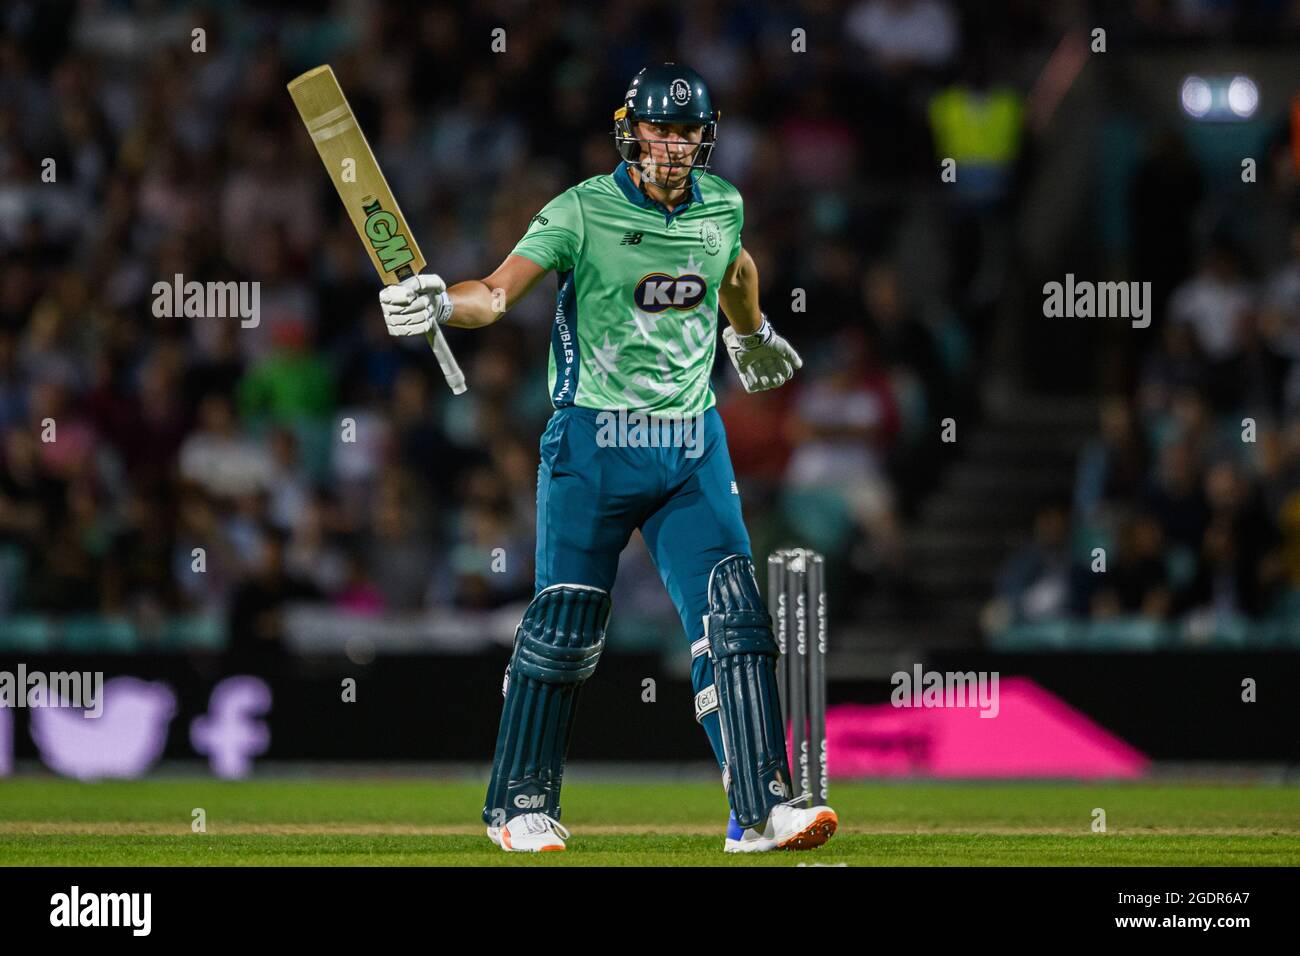 LONDON, UNITED KINGDOM. 14th Aug, 2021. Will Jacks of Oval Invincibles during The Hundred between Oval Invincibles vs London Spirit at The Oval Cricket Ground on Saturday, August 14, 2021 in LONDON ENGLAND.  Credit: Taka G Wu/Alamy Live News Stock Photo